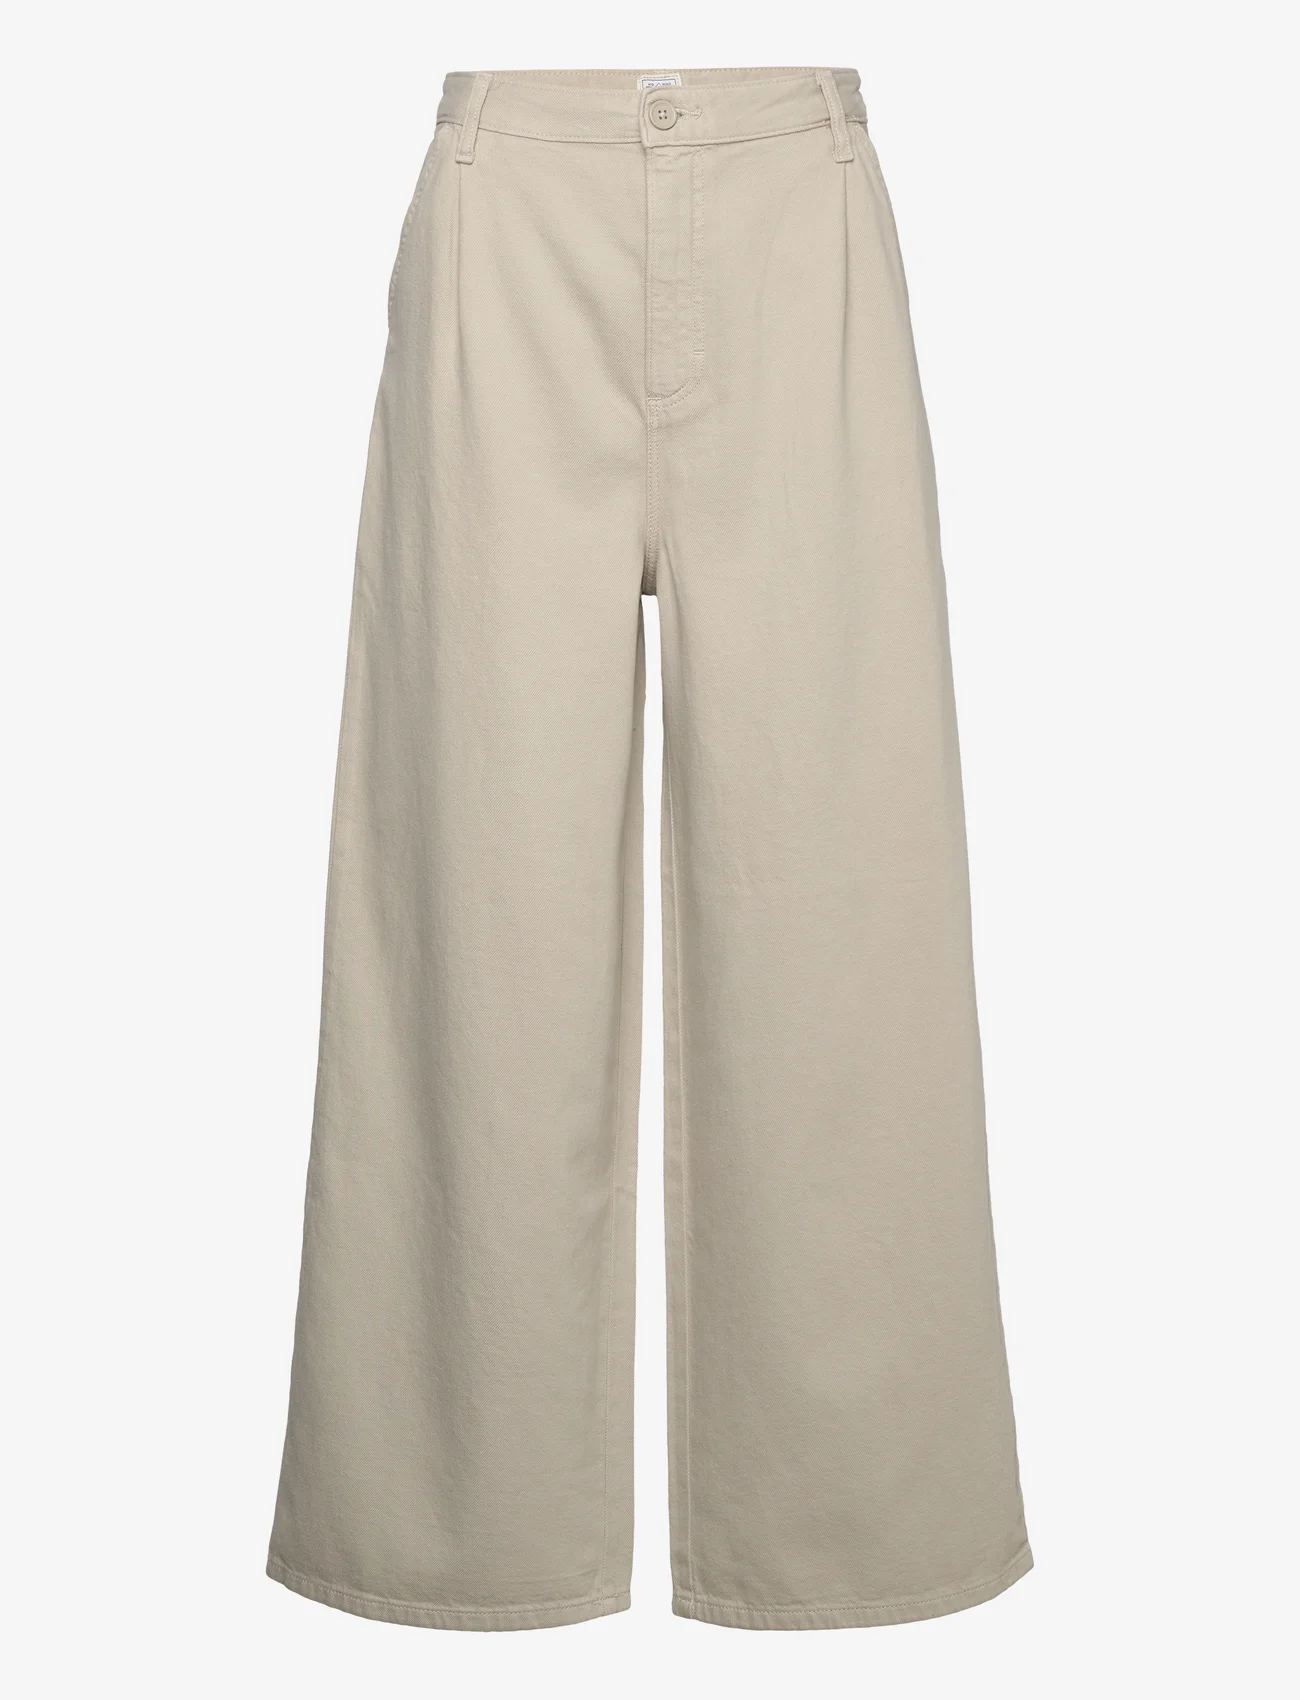 Lee Jeans - RELAXED CHINO - wide leg trousers - salina stone - 0